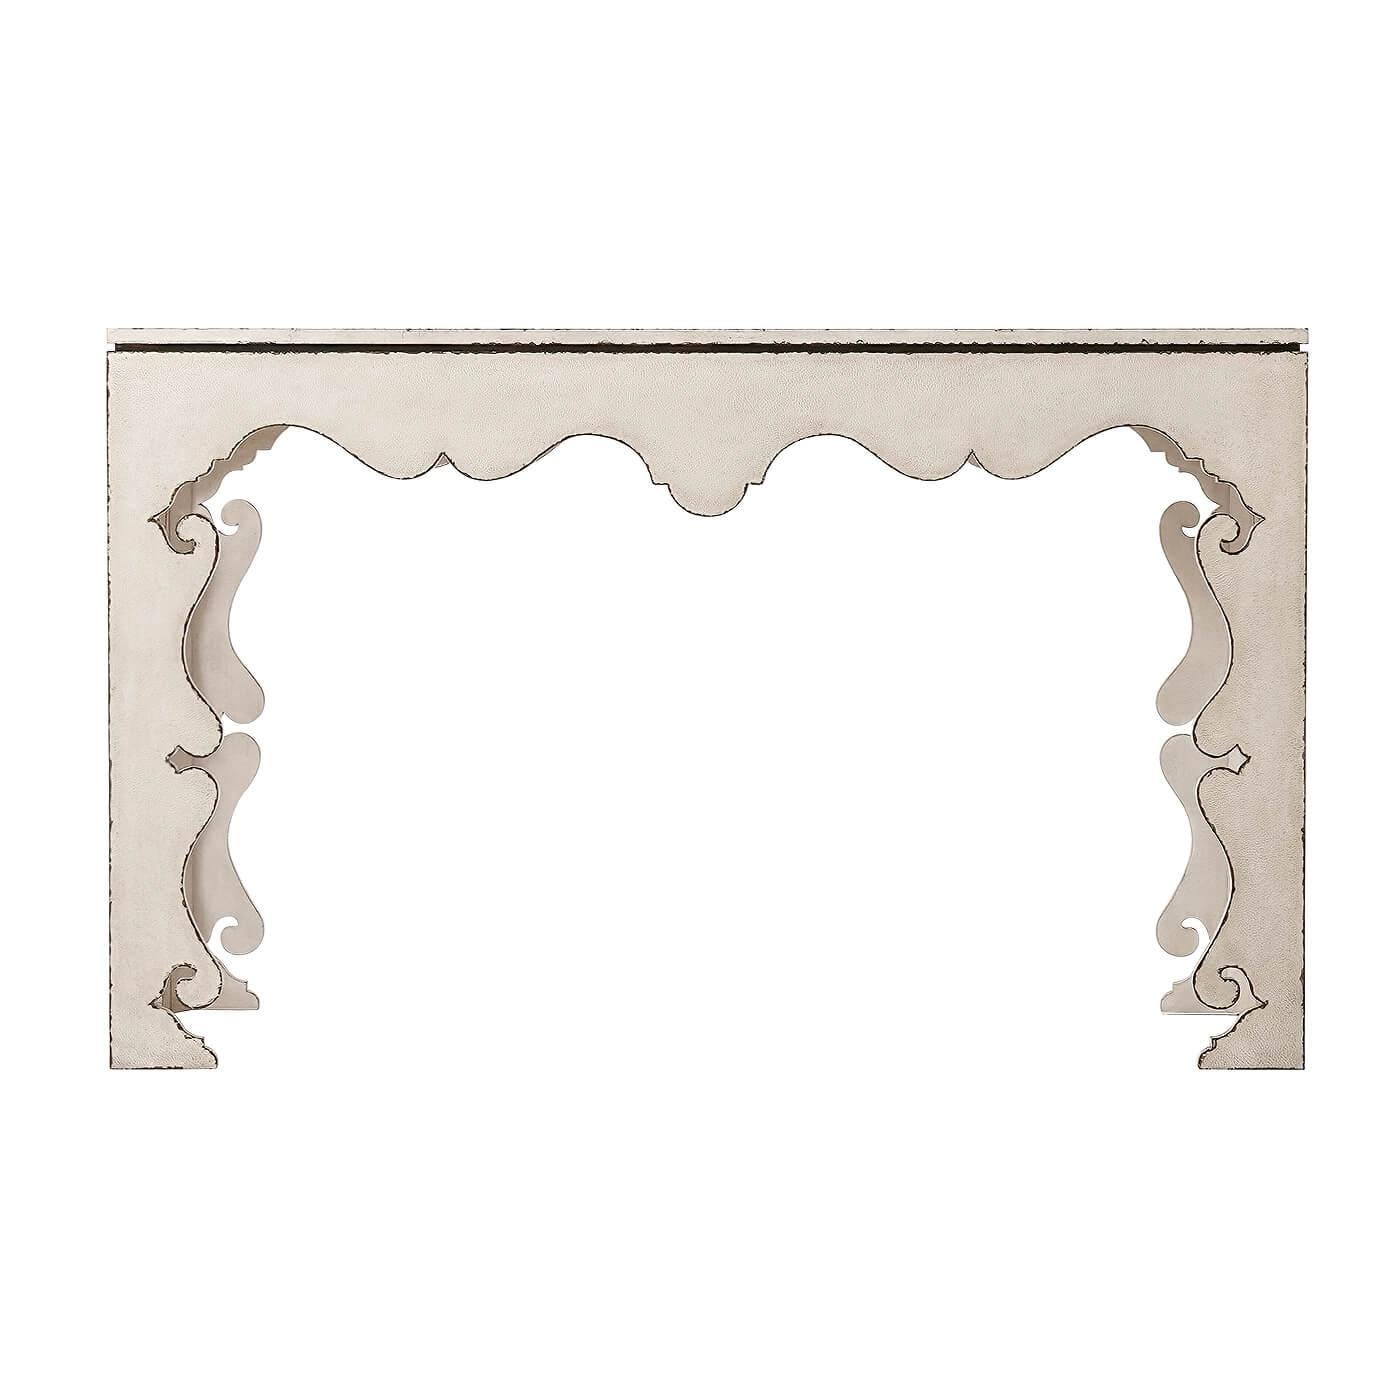 A Moorish influenced vintage cream painted console table, the rectangular floating and leather strapwork relief decorated top, on square exterior edge legs with serpentine fretwork interiors.

Dimensions: 58